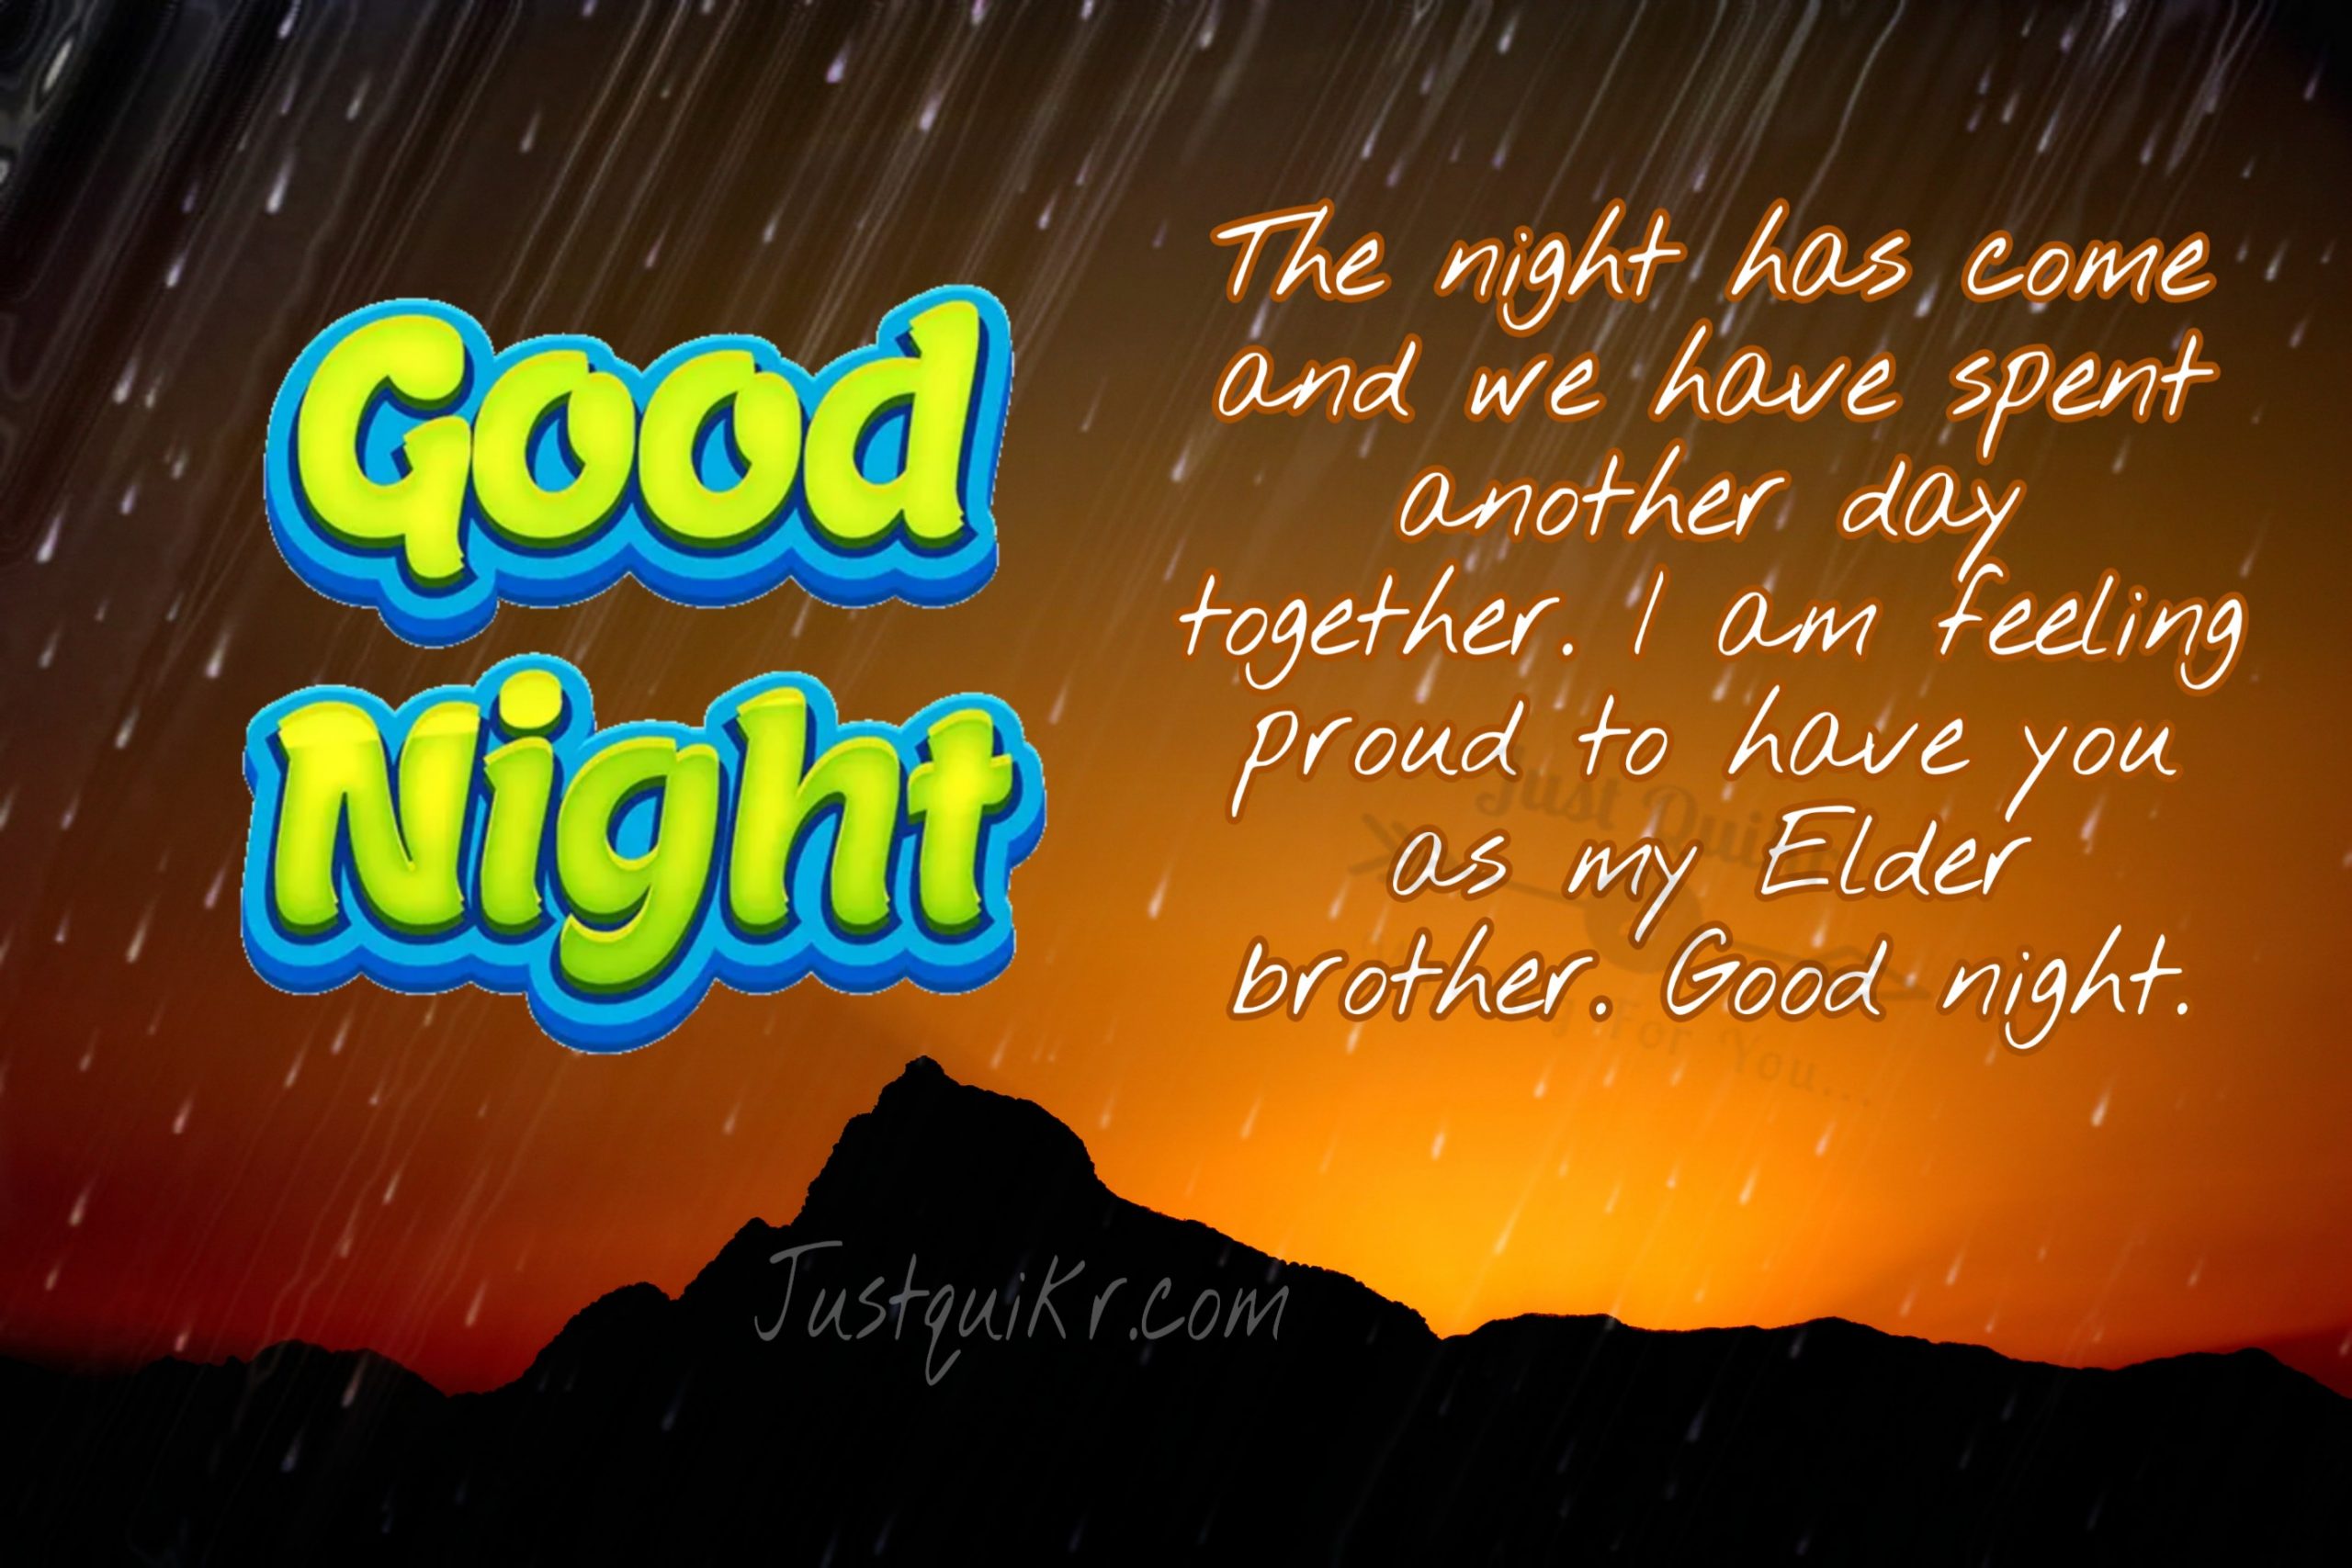 Good Night HD Pics Images For Elder Brother